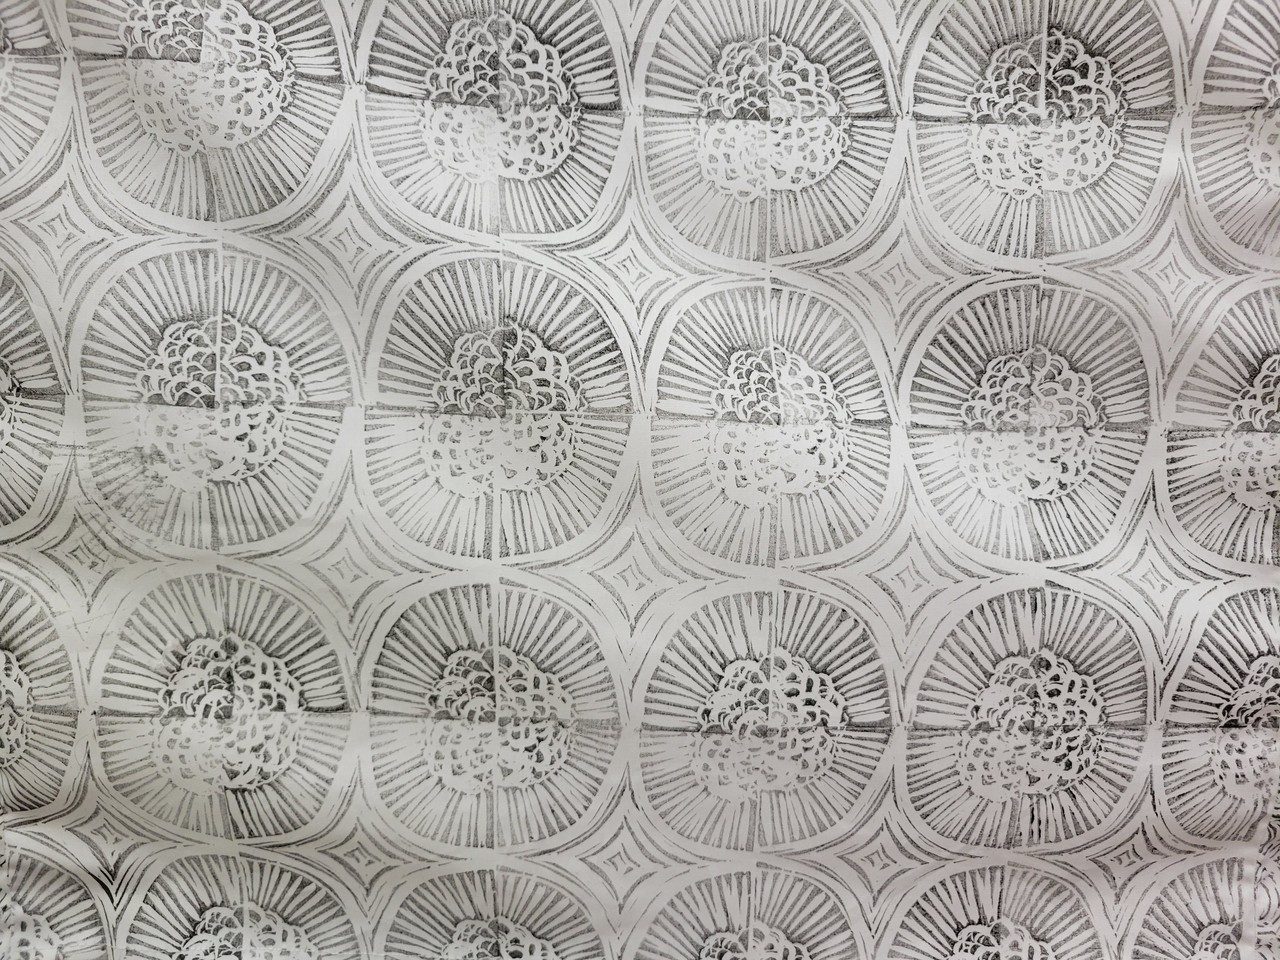 close up capture of a large black and white bloc printing on textile with repetitive and abstract motif inspired by organic forms